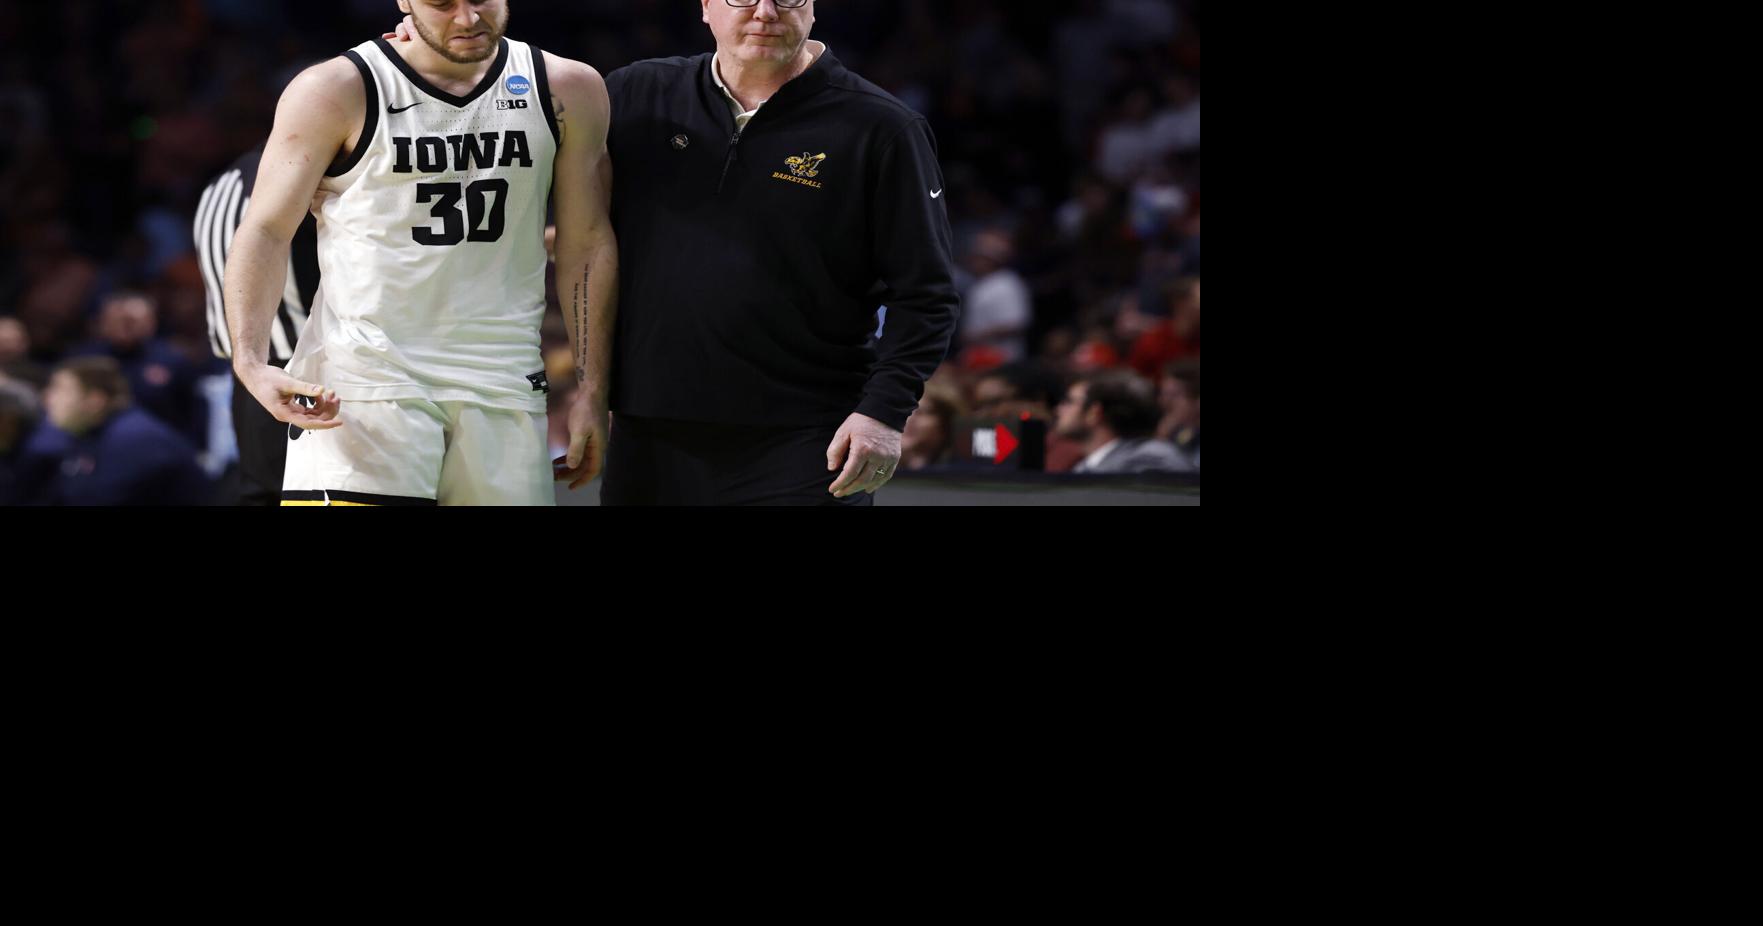 Hawkeye coach savors one final father-son moment